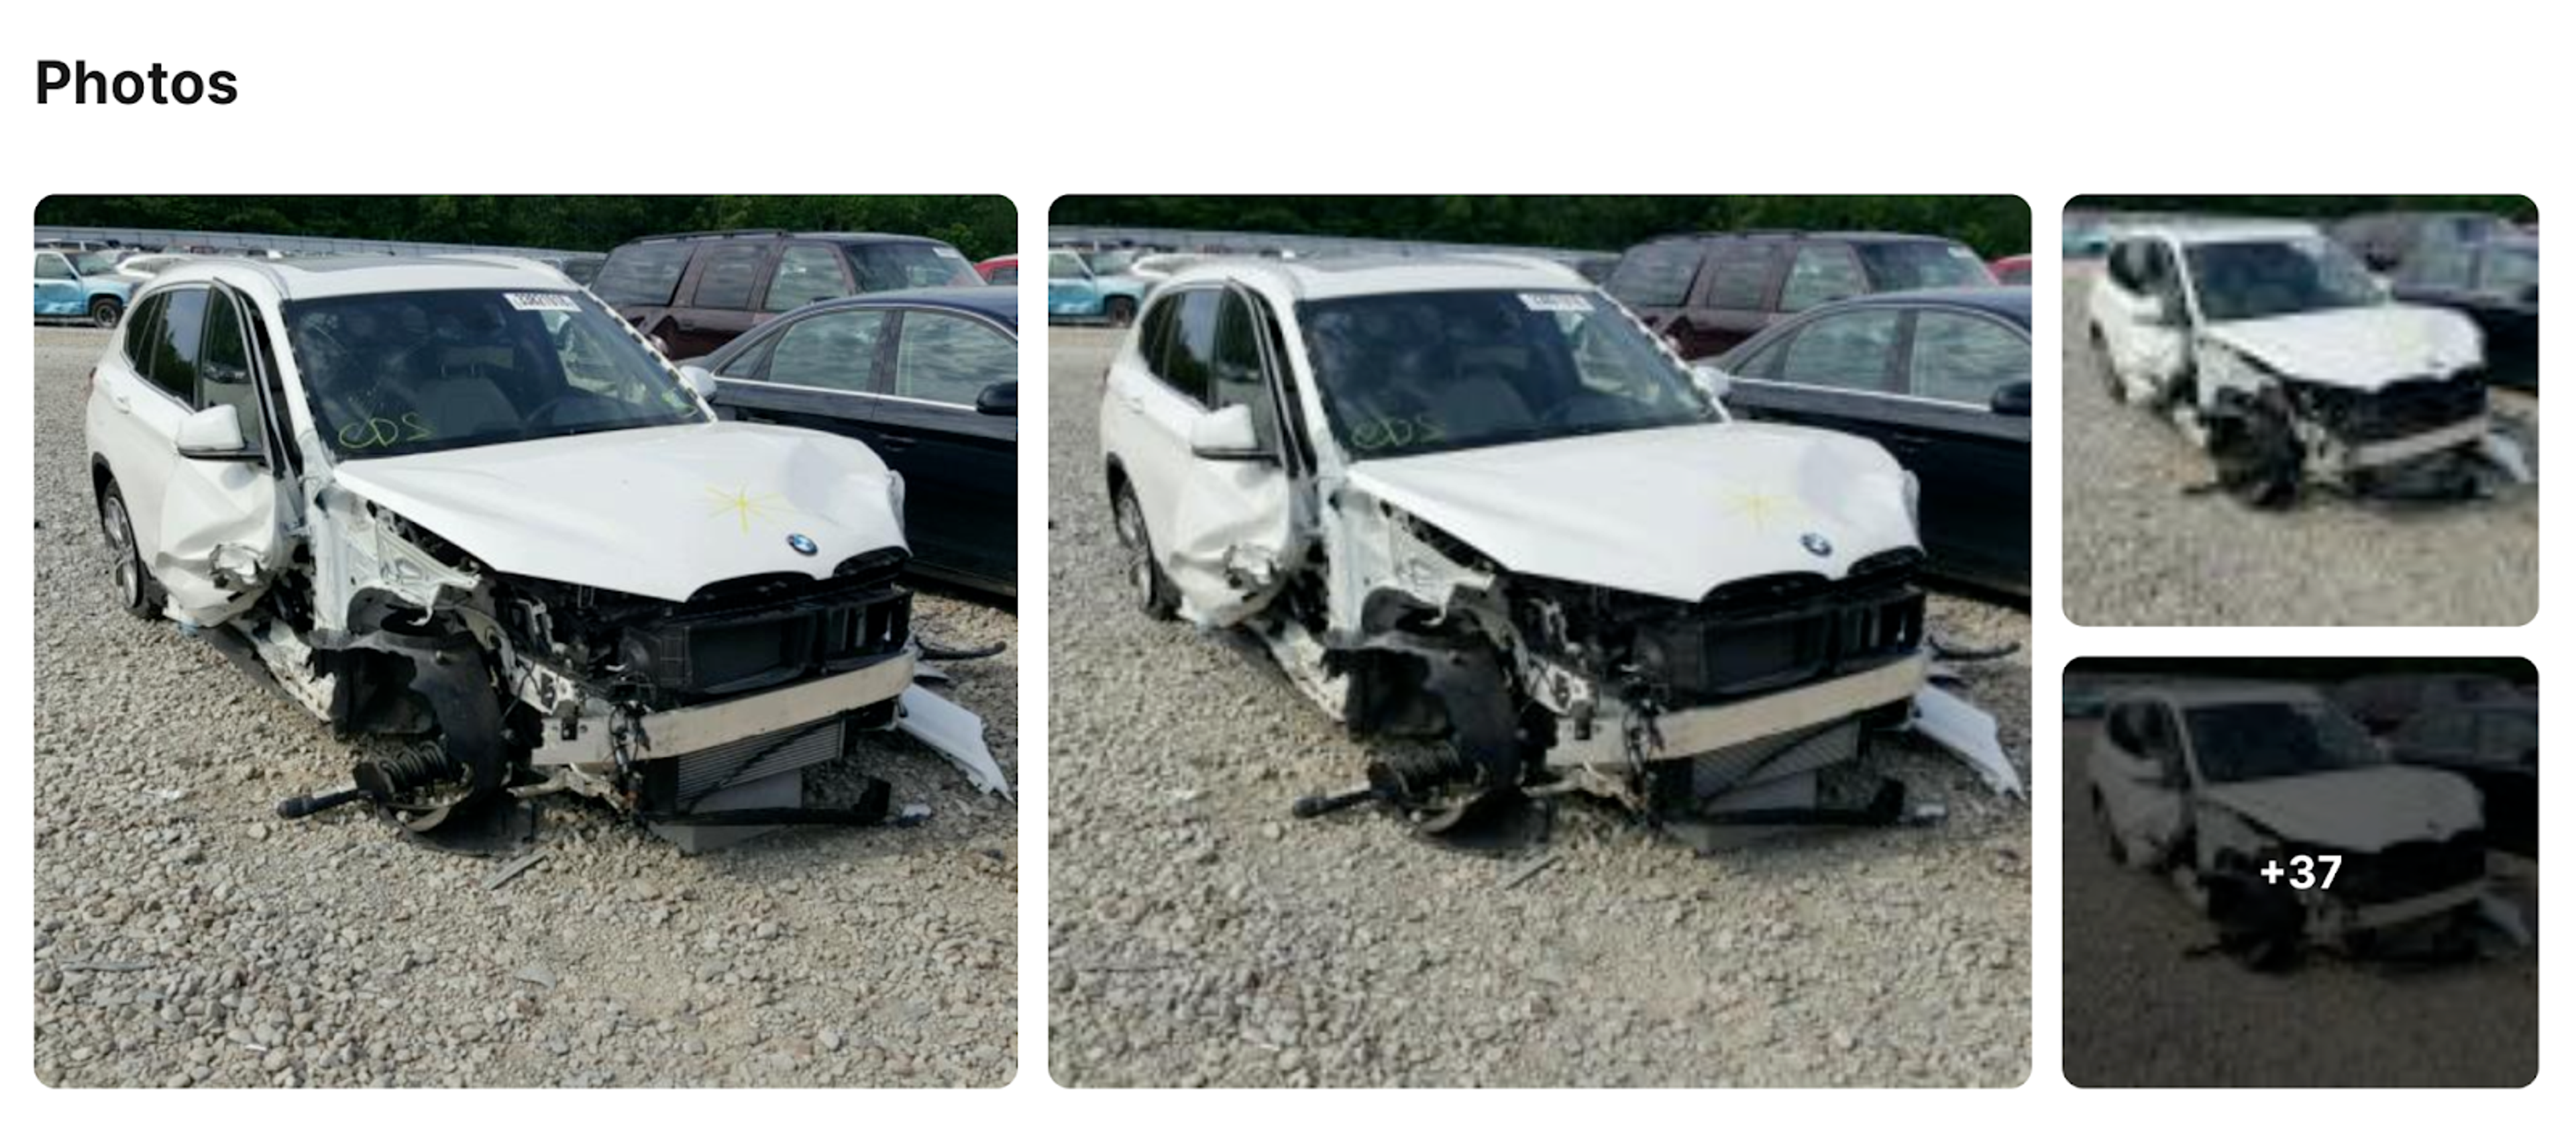 BMW car after an accident with front damage in a parking lot 